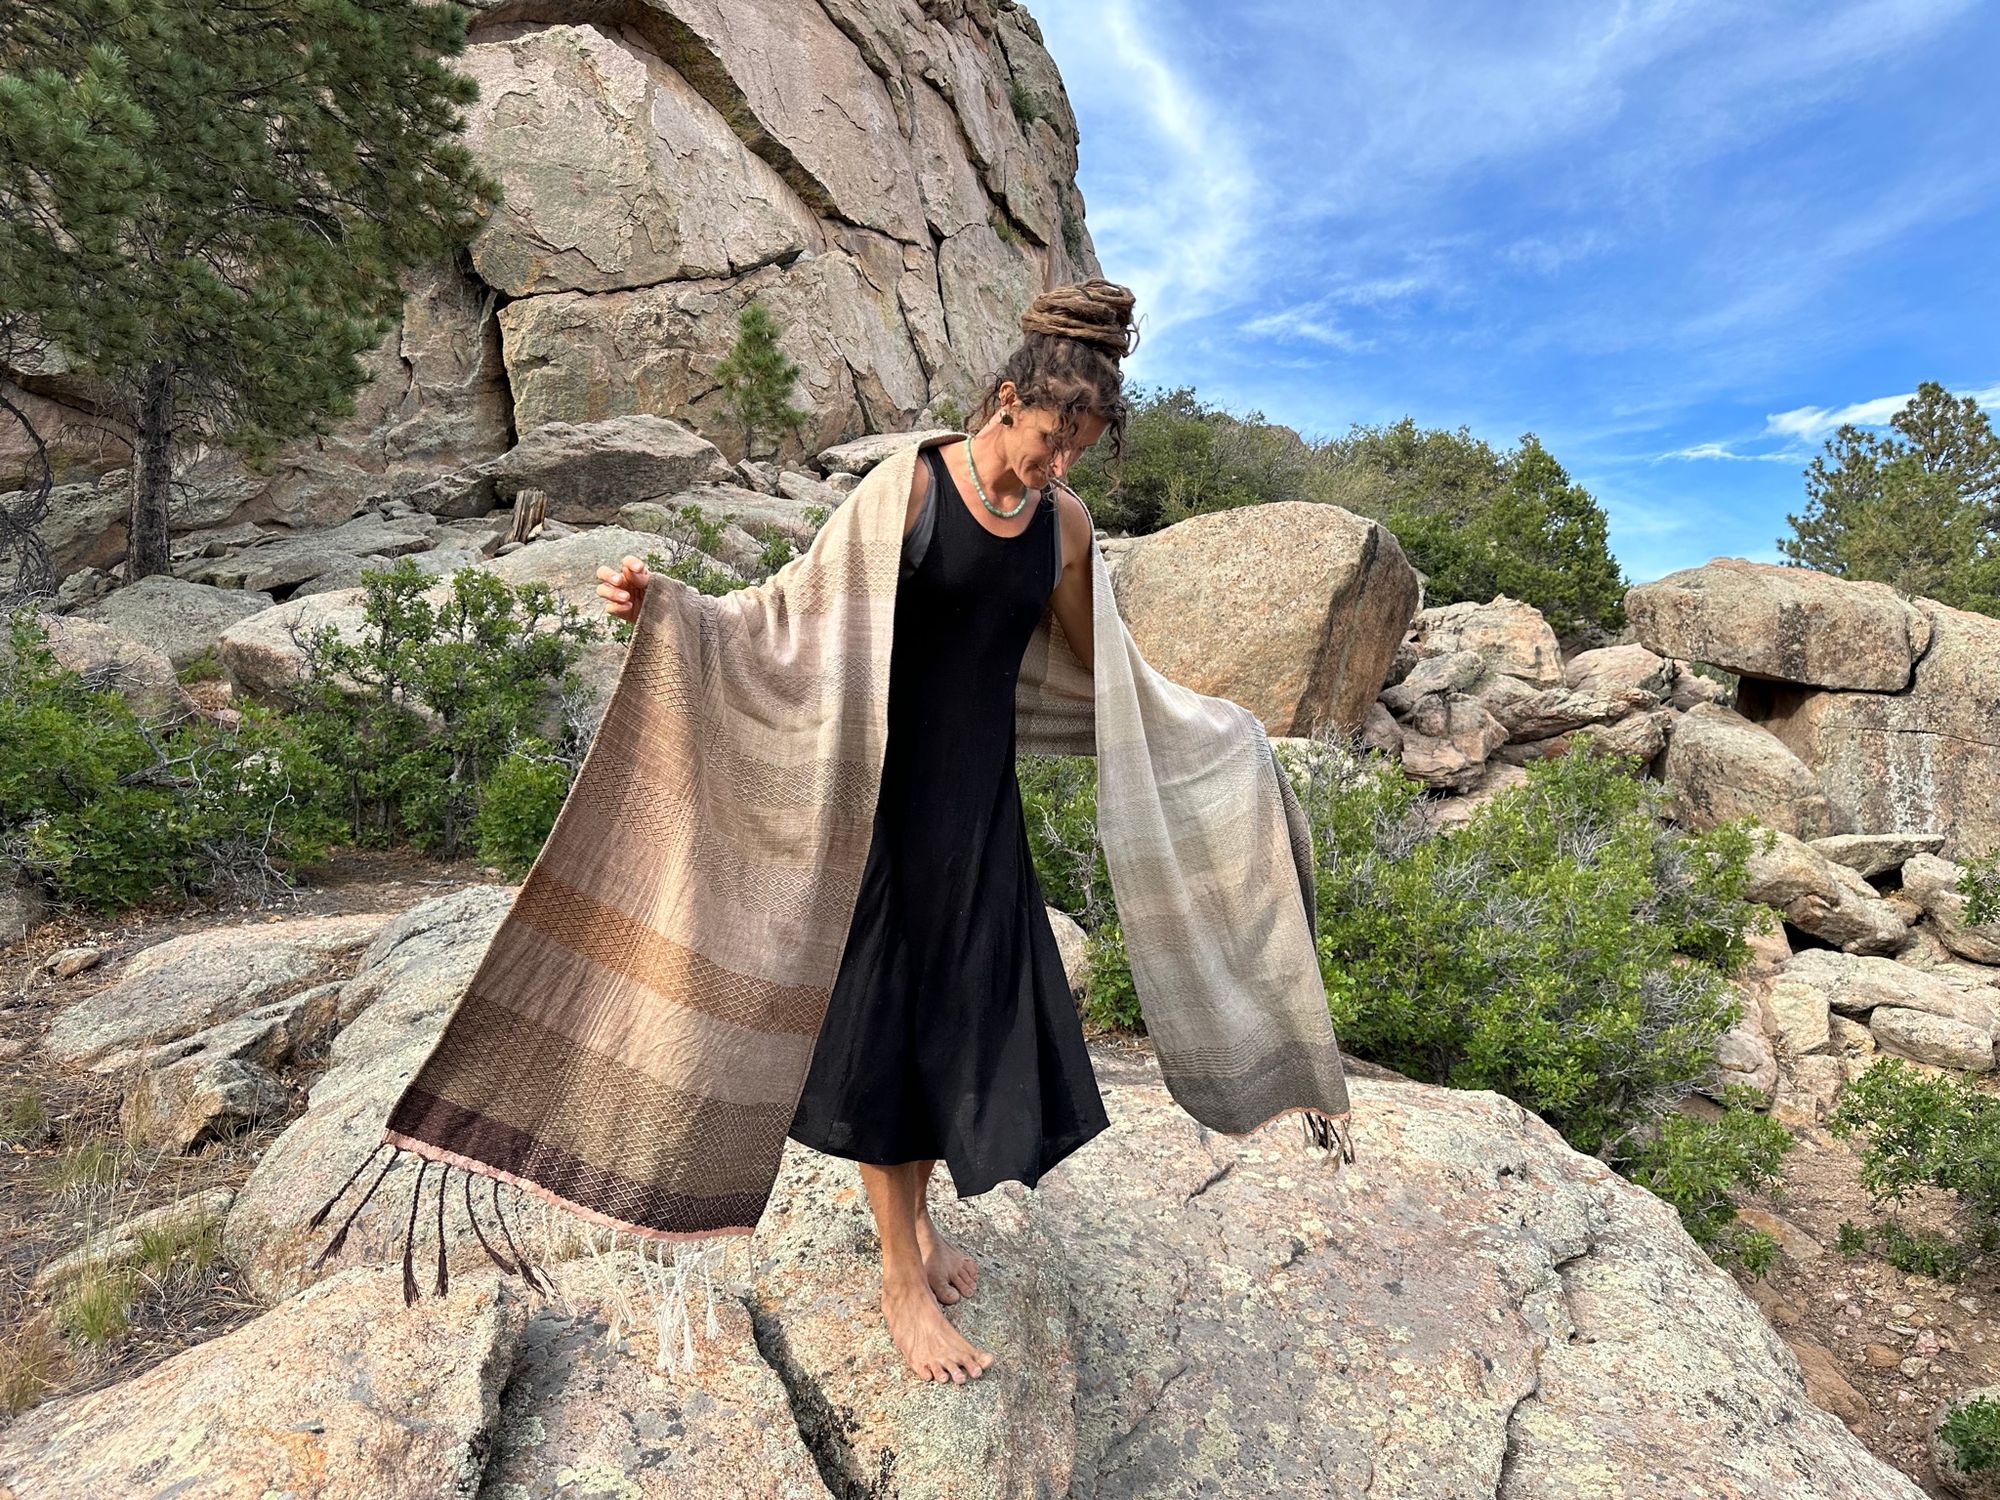 A woman in a black dress stands on large rocks wearing a handwoven naturally dyed grey, brown and white shawl